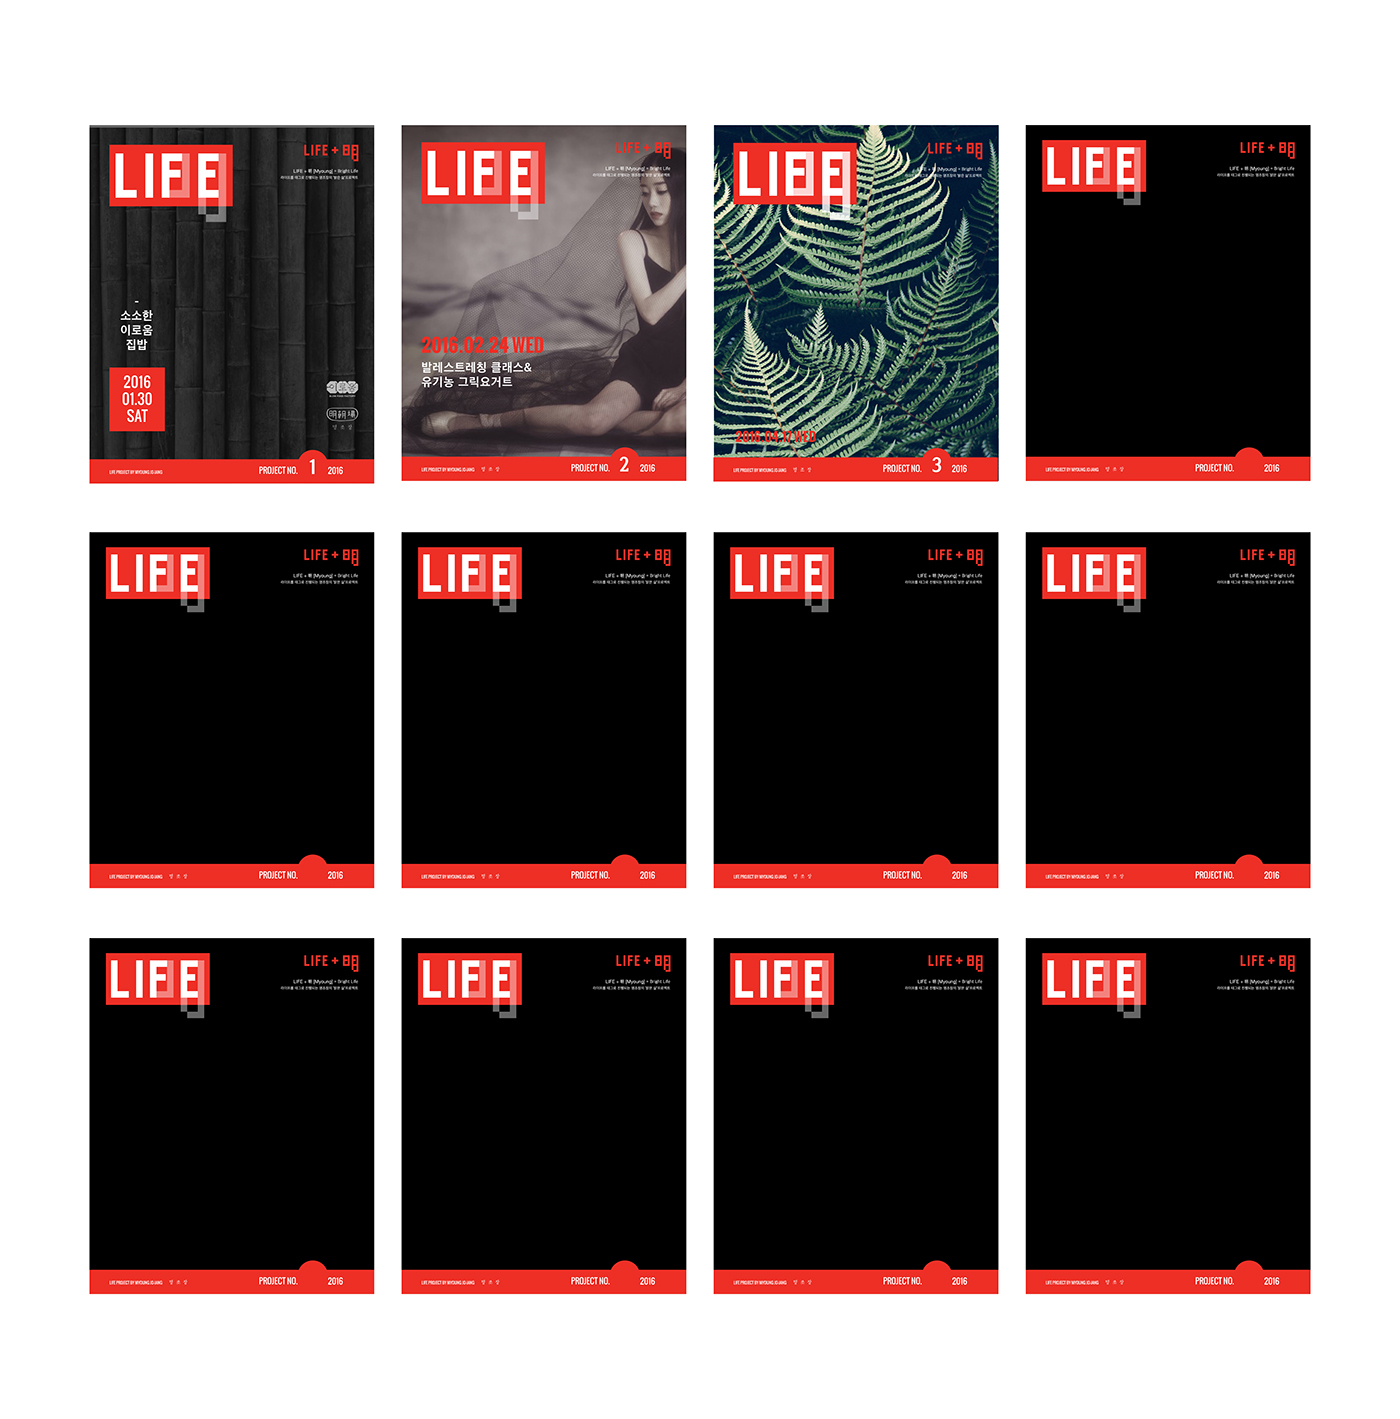 life poster Project red black LIFEMagazine magazine Event businesscard